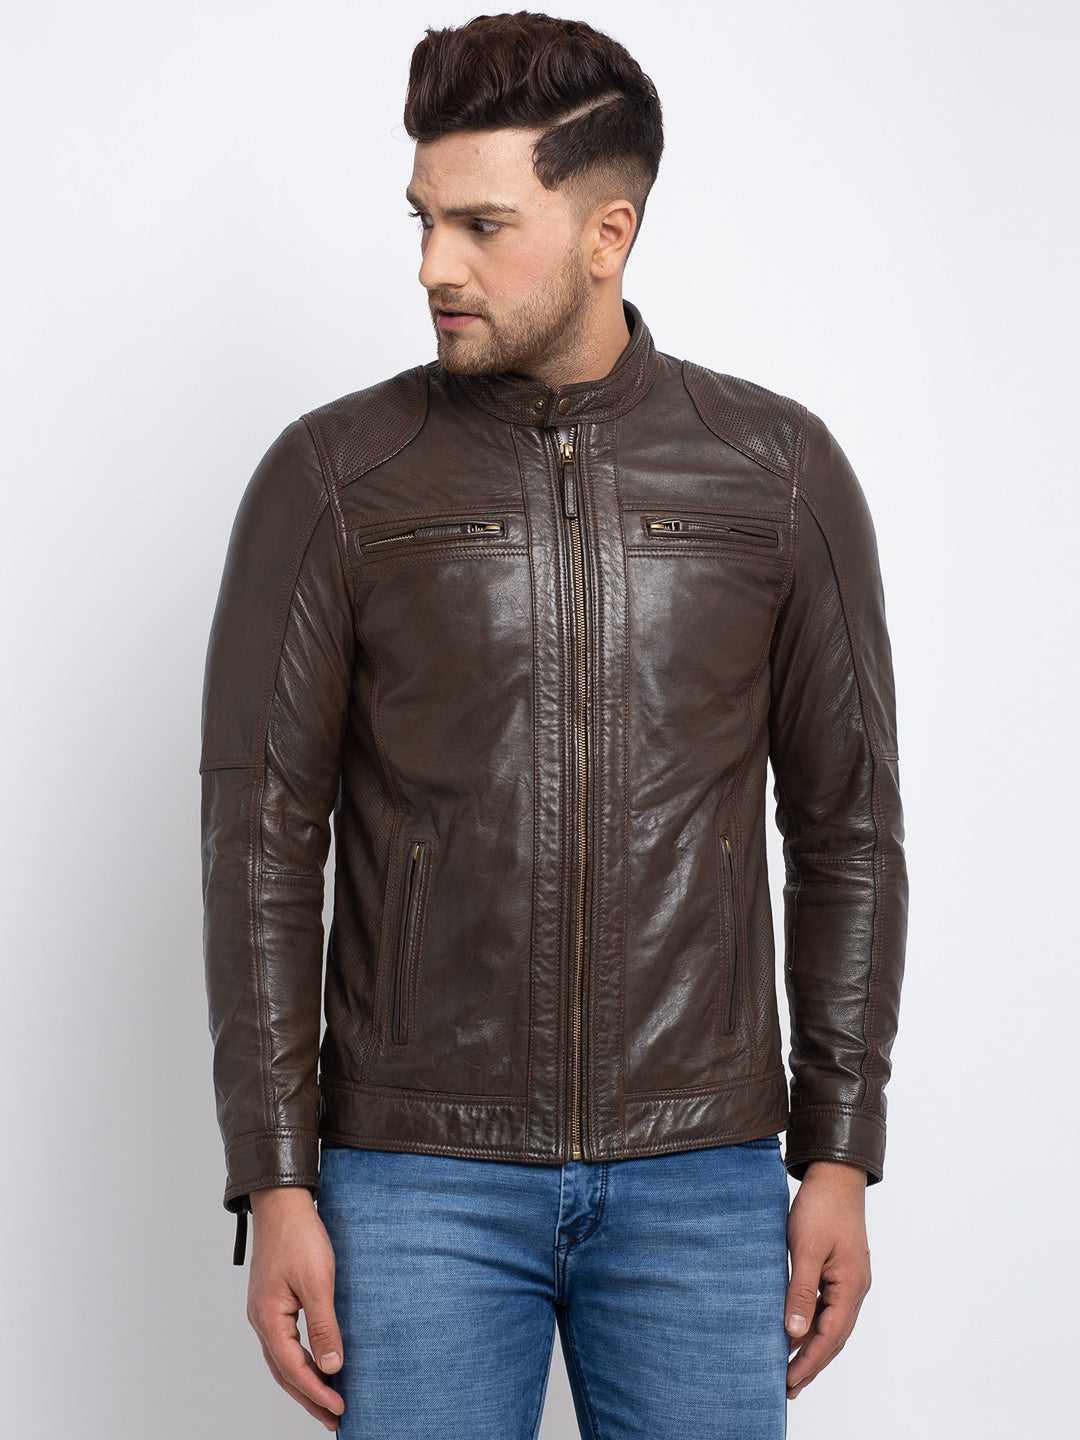 Revamp Your Wardrobe: Men's Leather Jacket Collection 🕴️🧥 | Leather jacket  men, Stylish leather jacket, Casual leather jacket